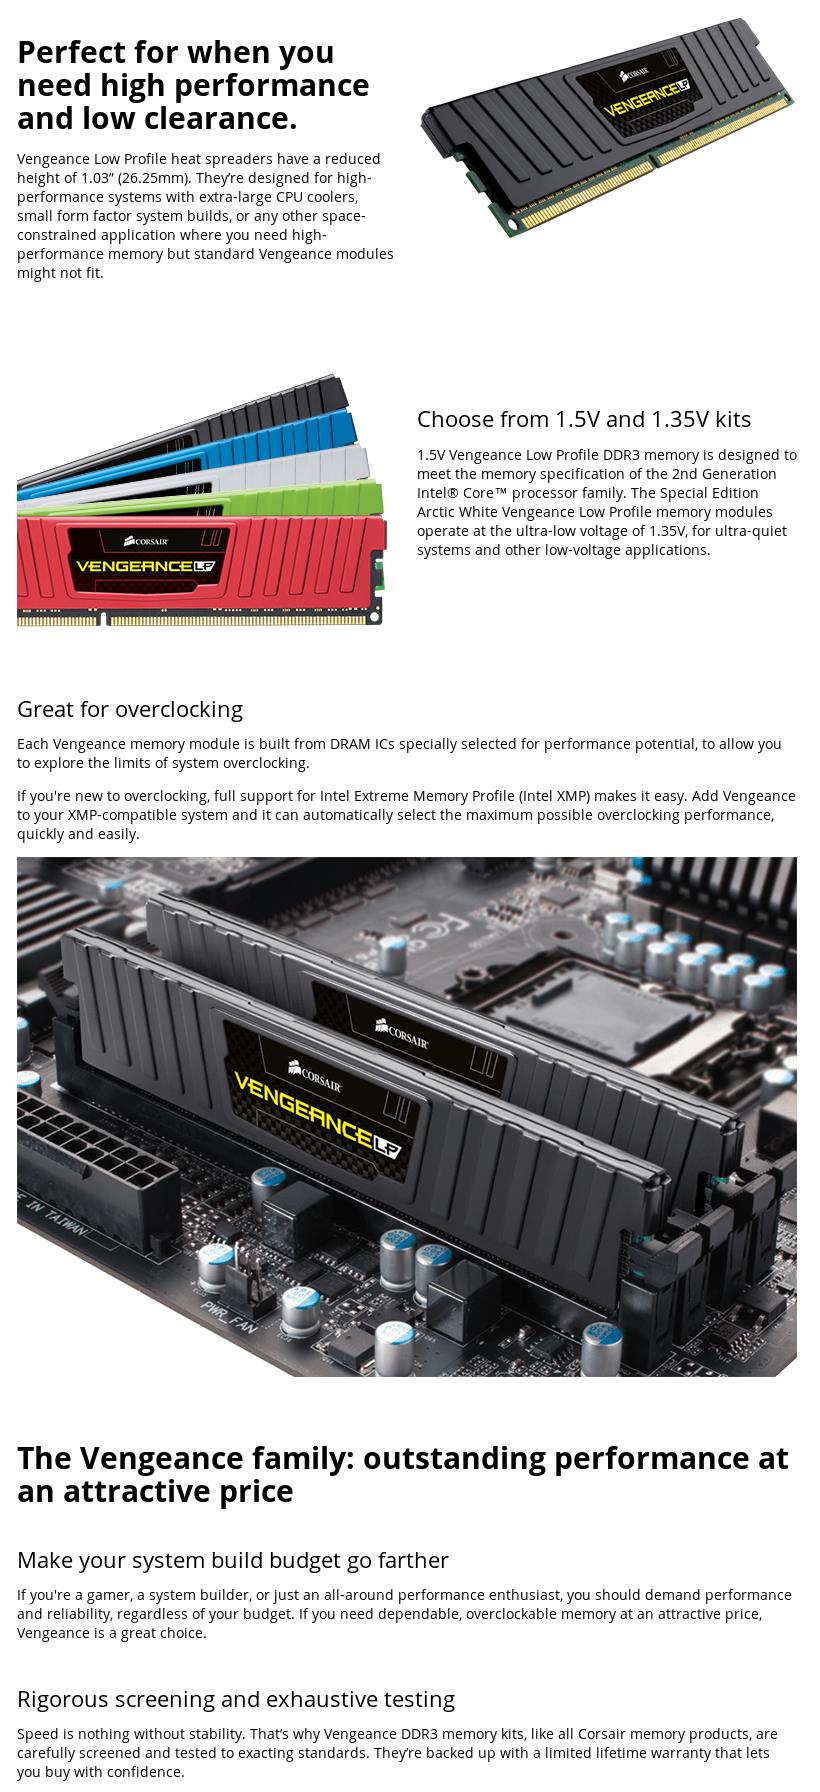 A large marketing image providing additional information about the product Corsair 16GB Kit (2x8GB) DDR3 Vengeance Low Profile C9 1600MHz - Black - Additional alt info not provided